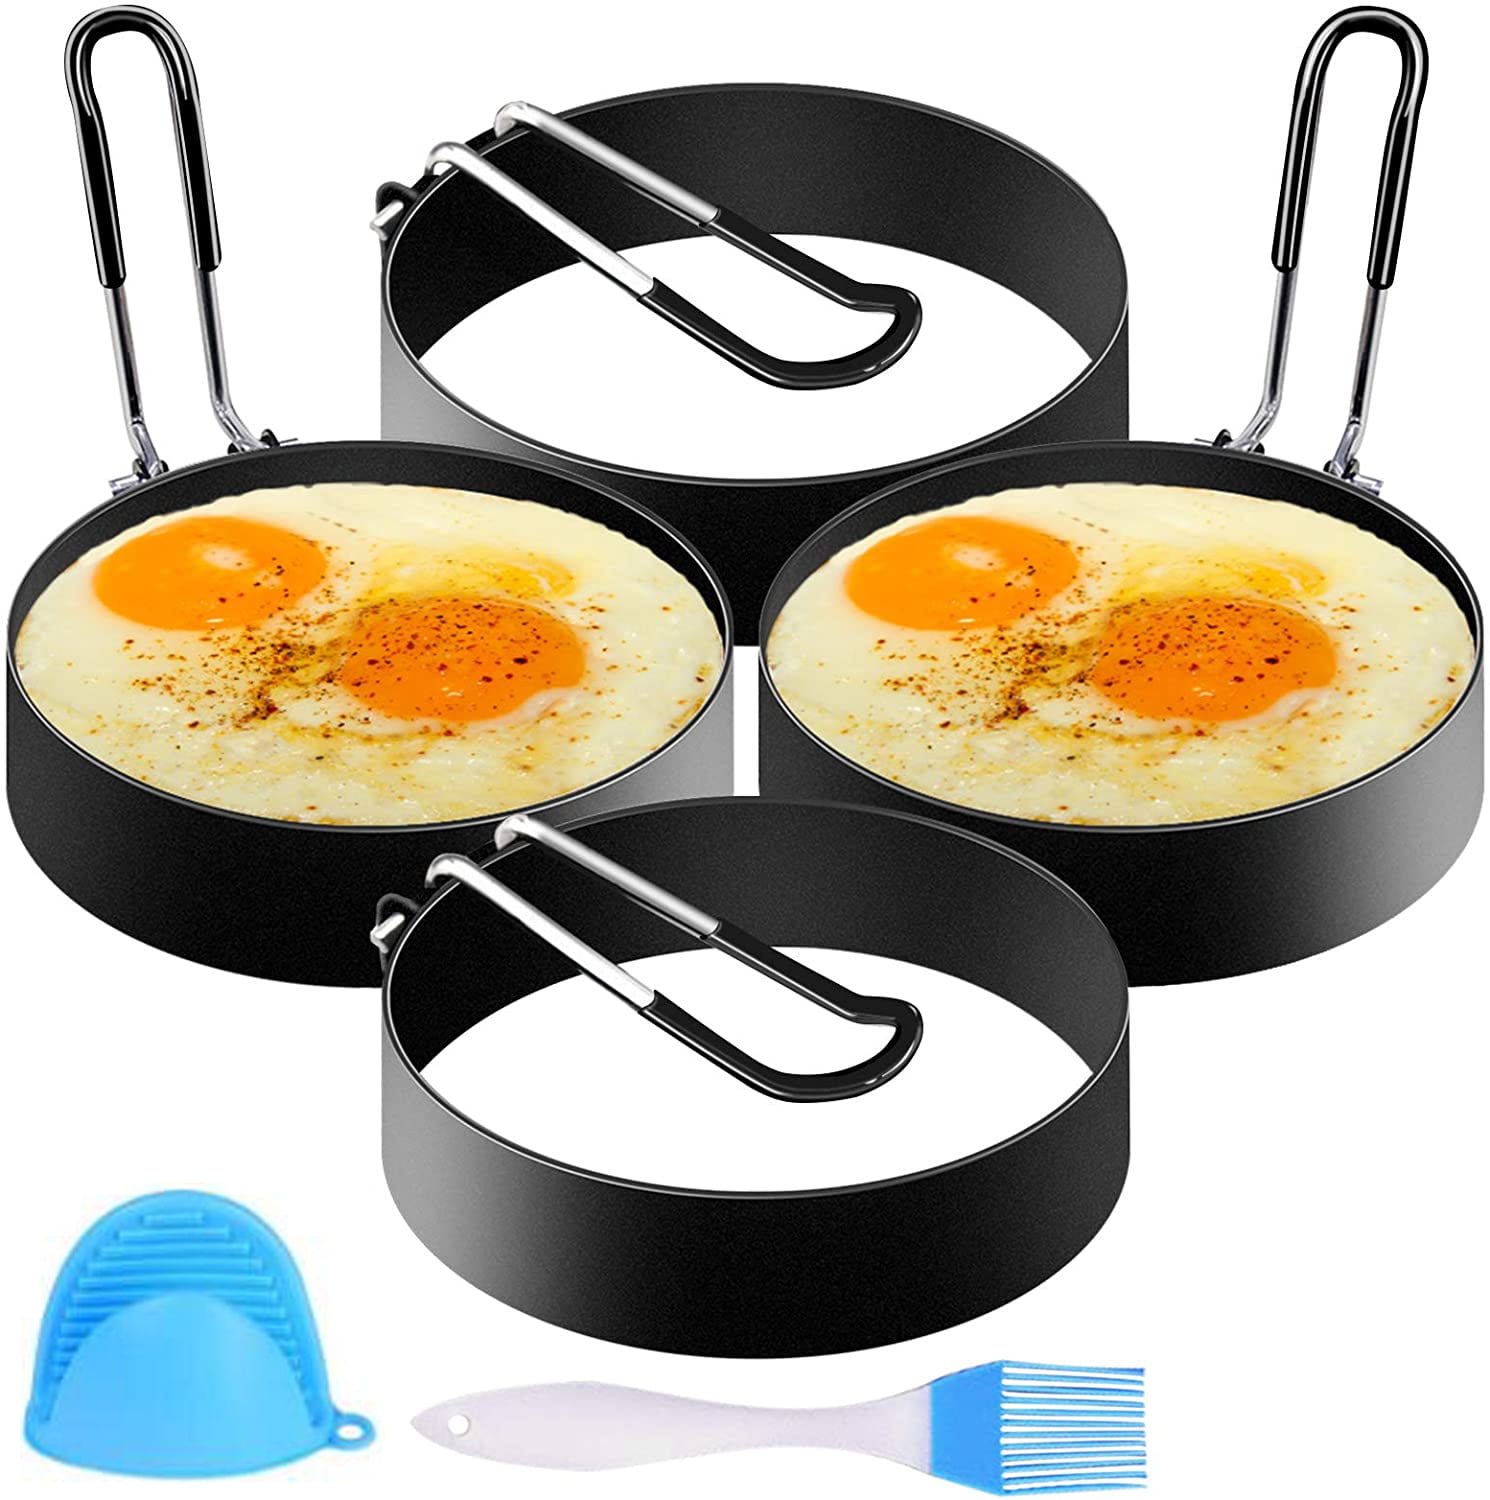 Egg Ring Mold Pancake Maker Fried Eggs Nonstick Molds Kitchen Tools Accessories 